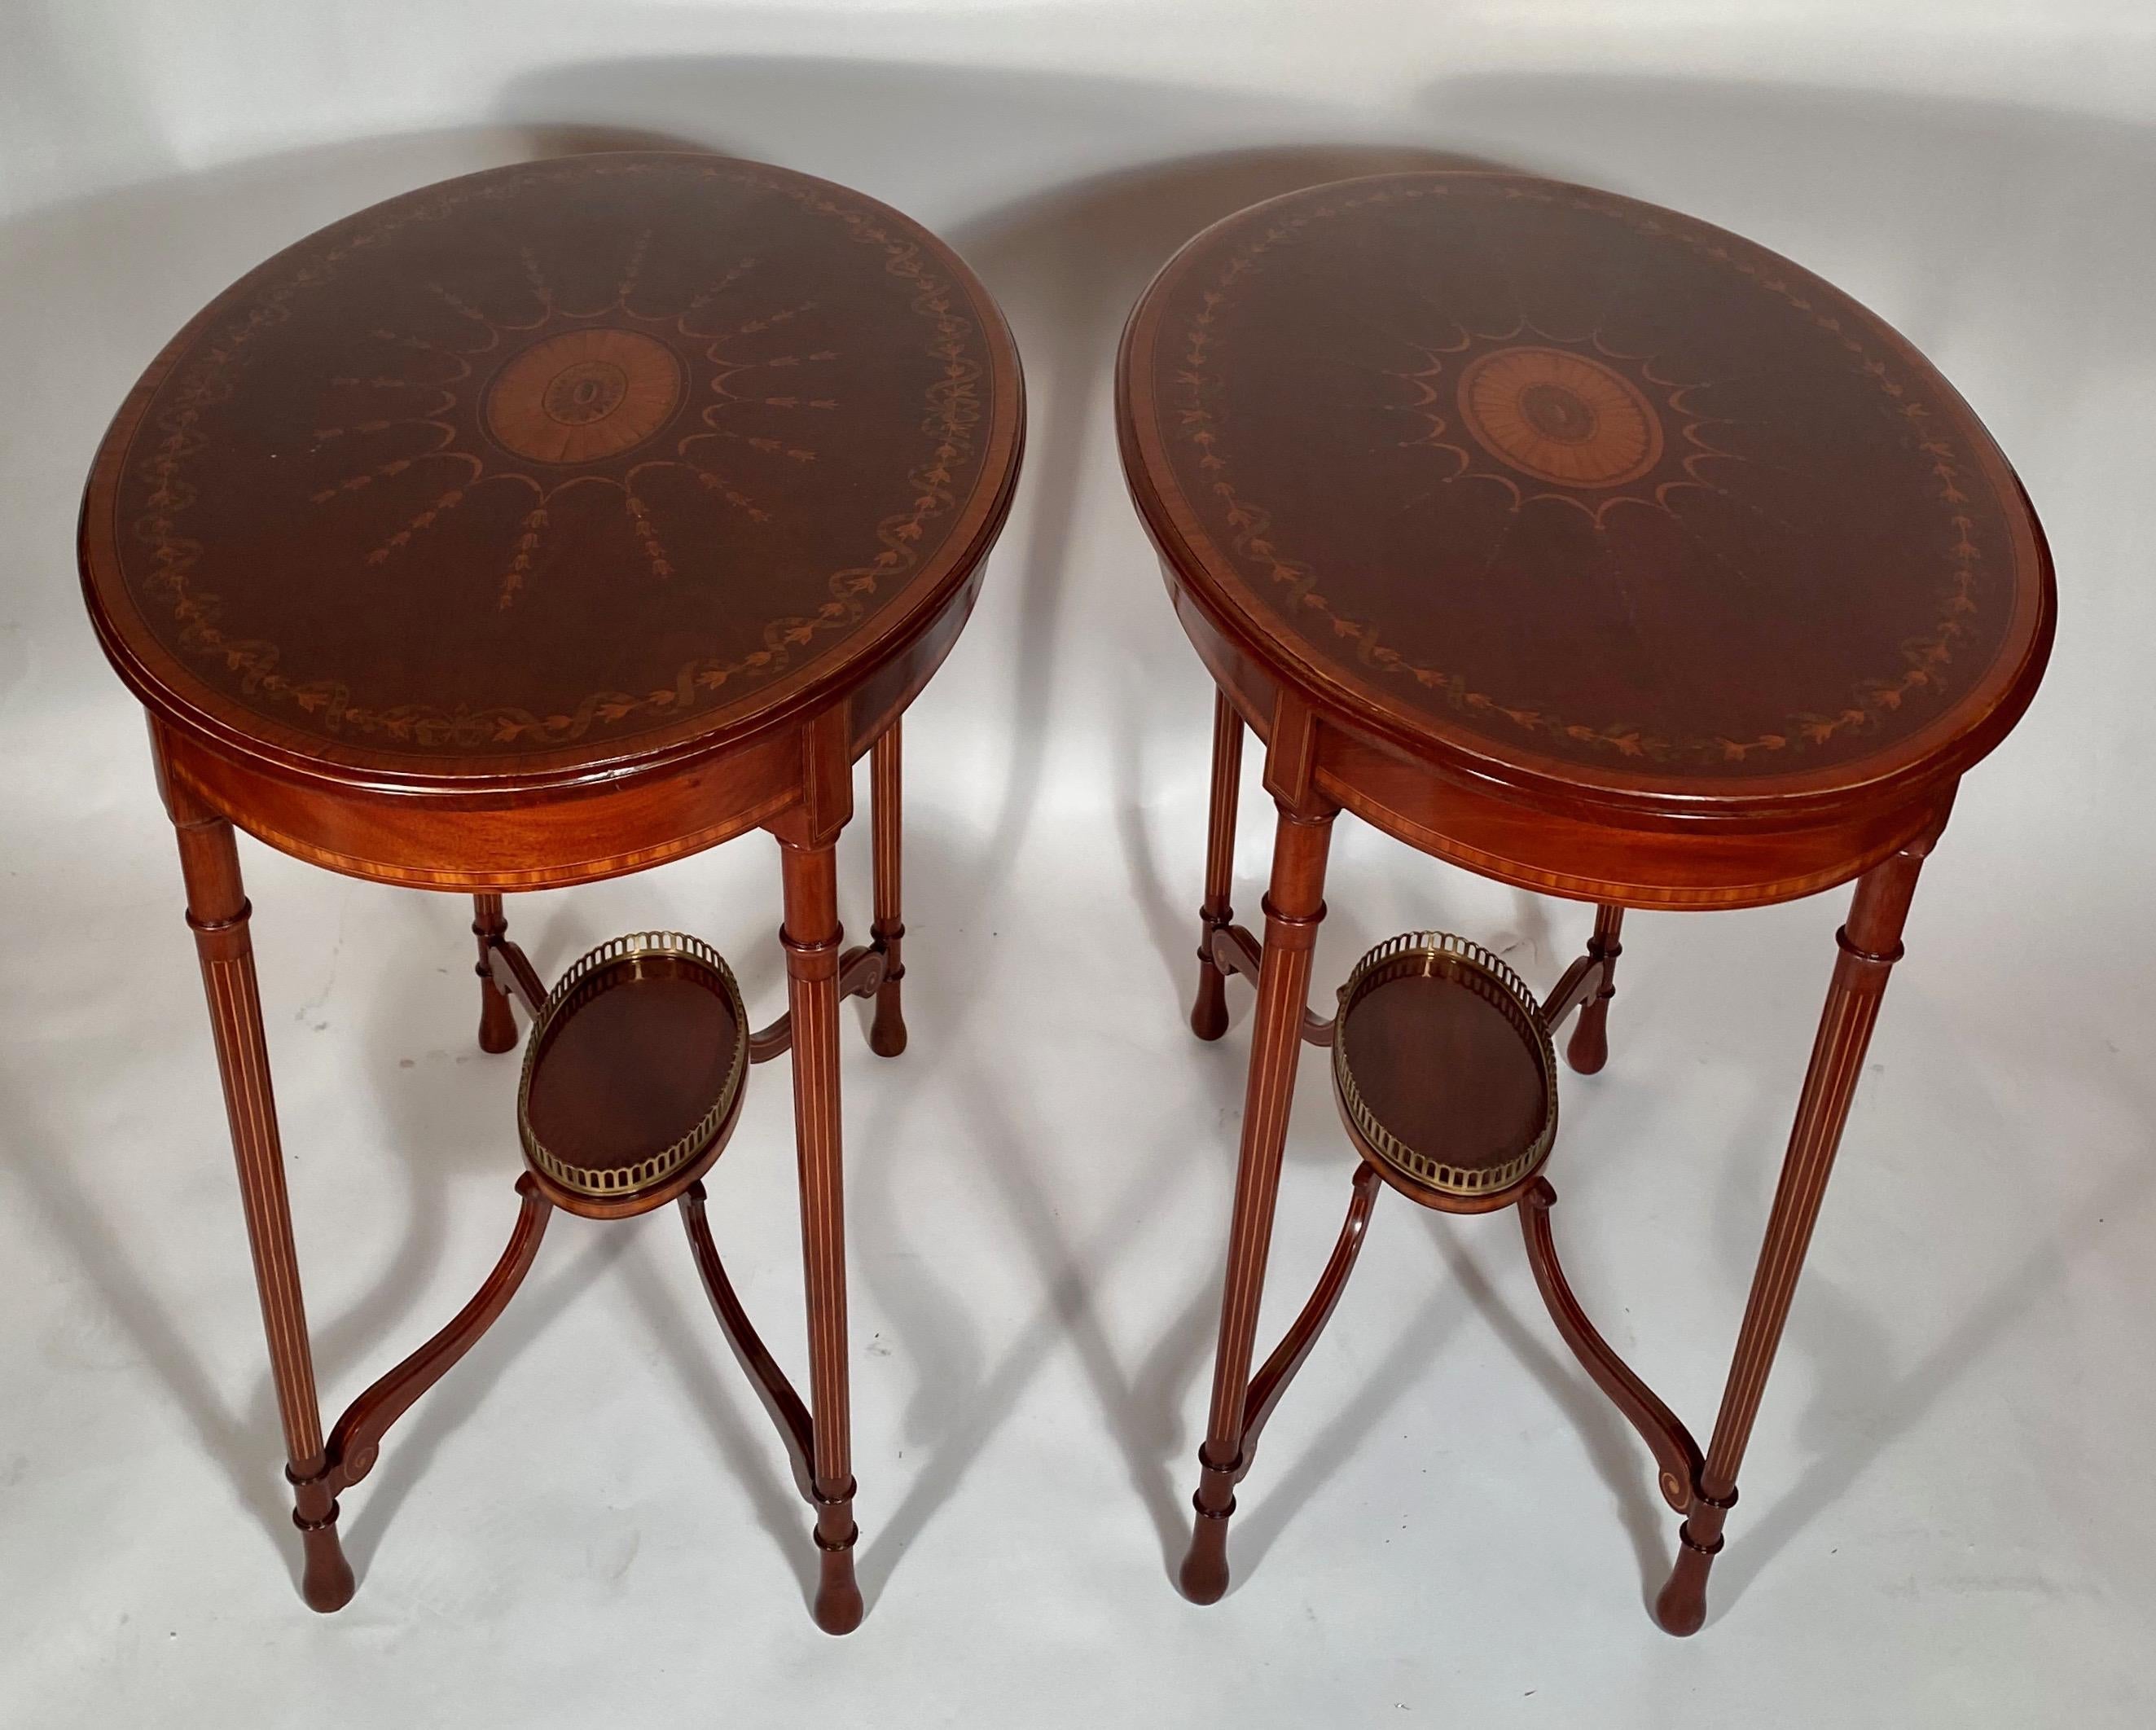 Such a pretty pair of occasional tables, with delicate inlay and a small galleried nesting area underneath. These are very versatile and pleasing.
 